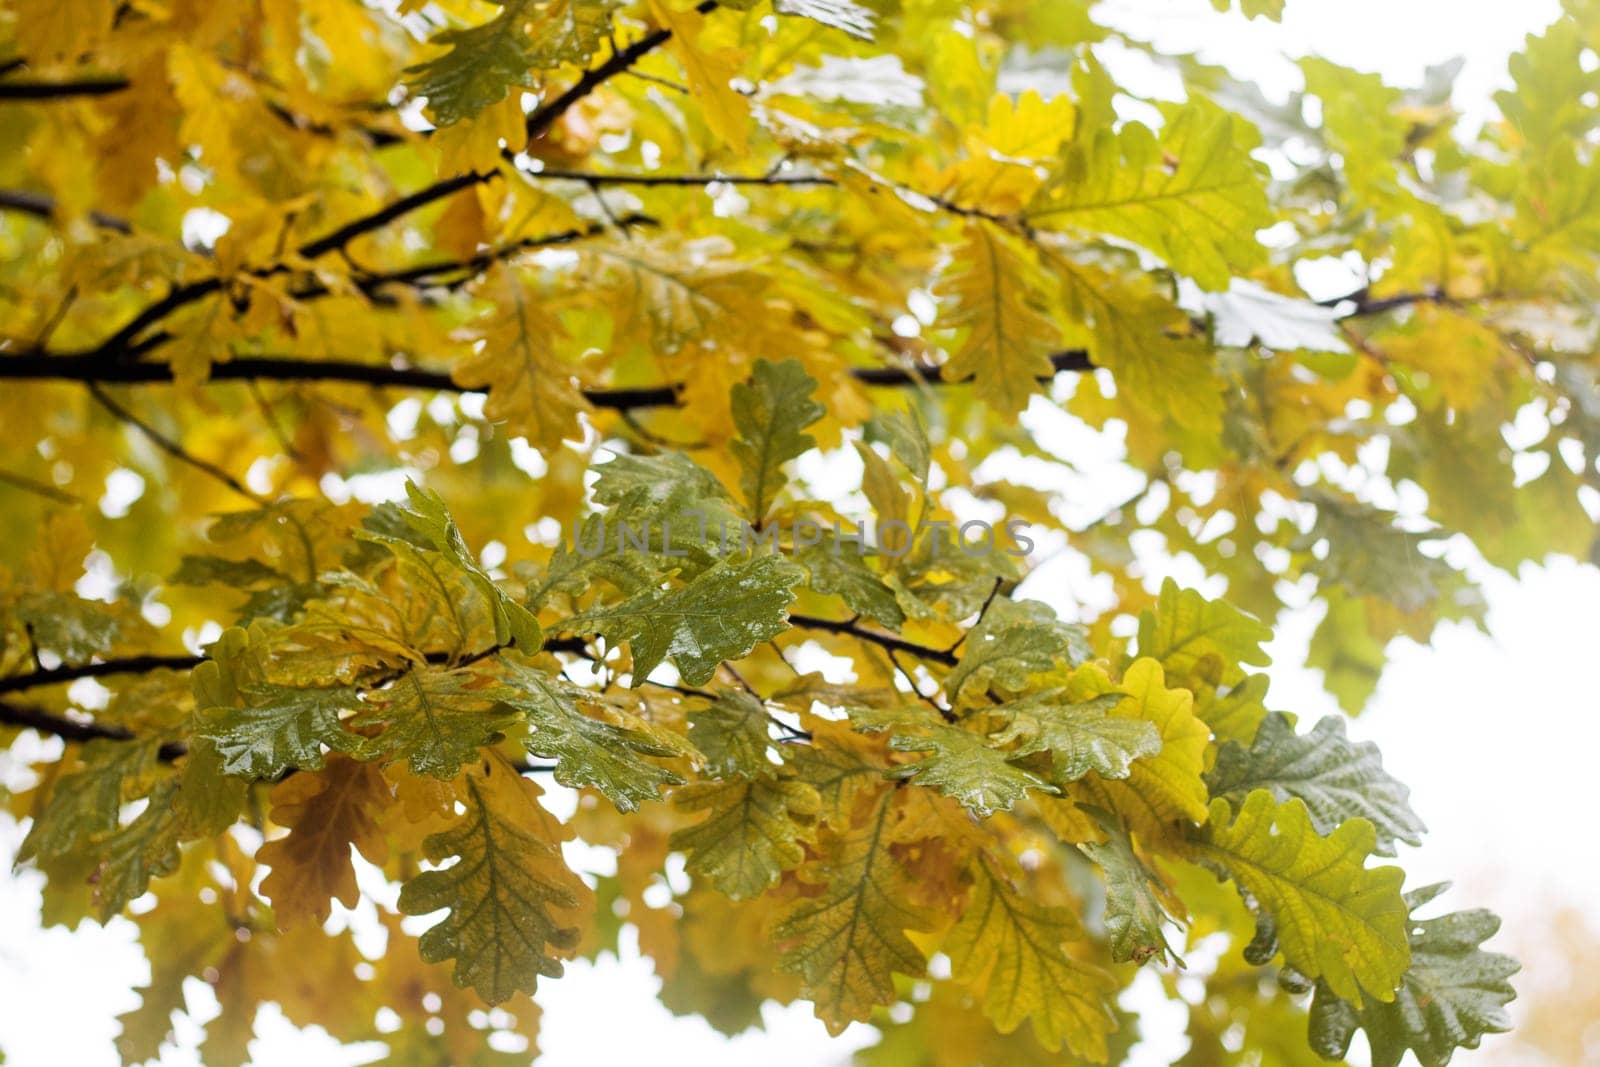 Yellow leaves on tree branches with dew drops close up